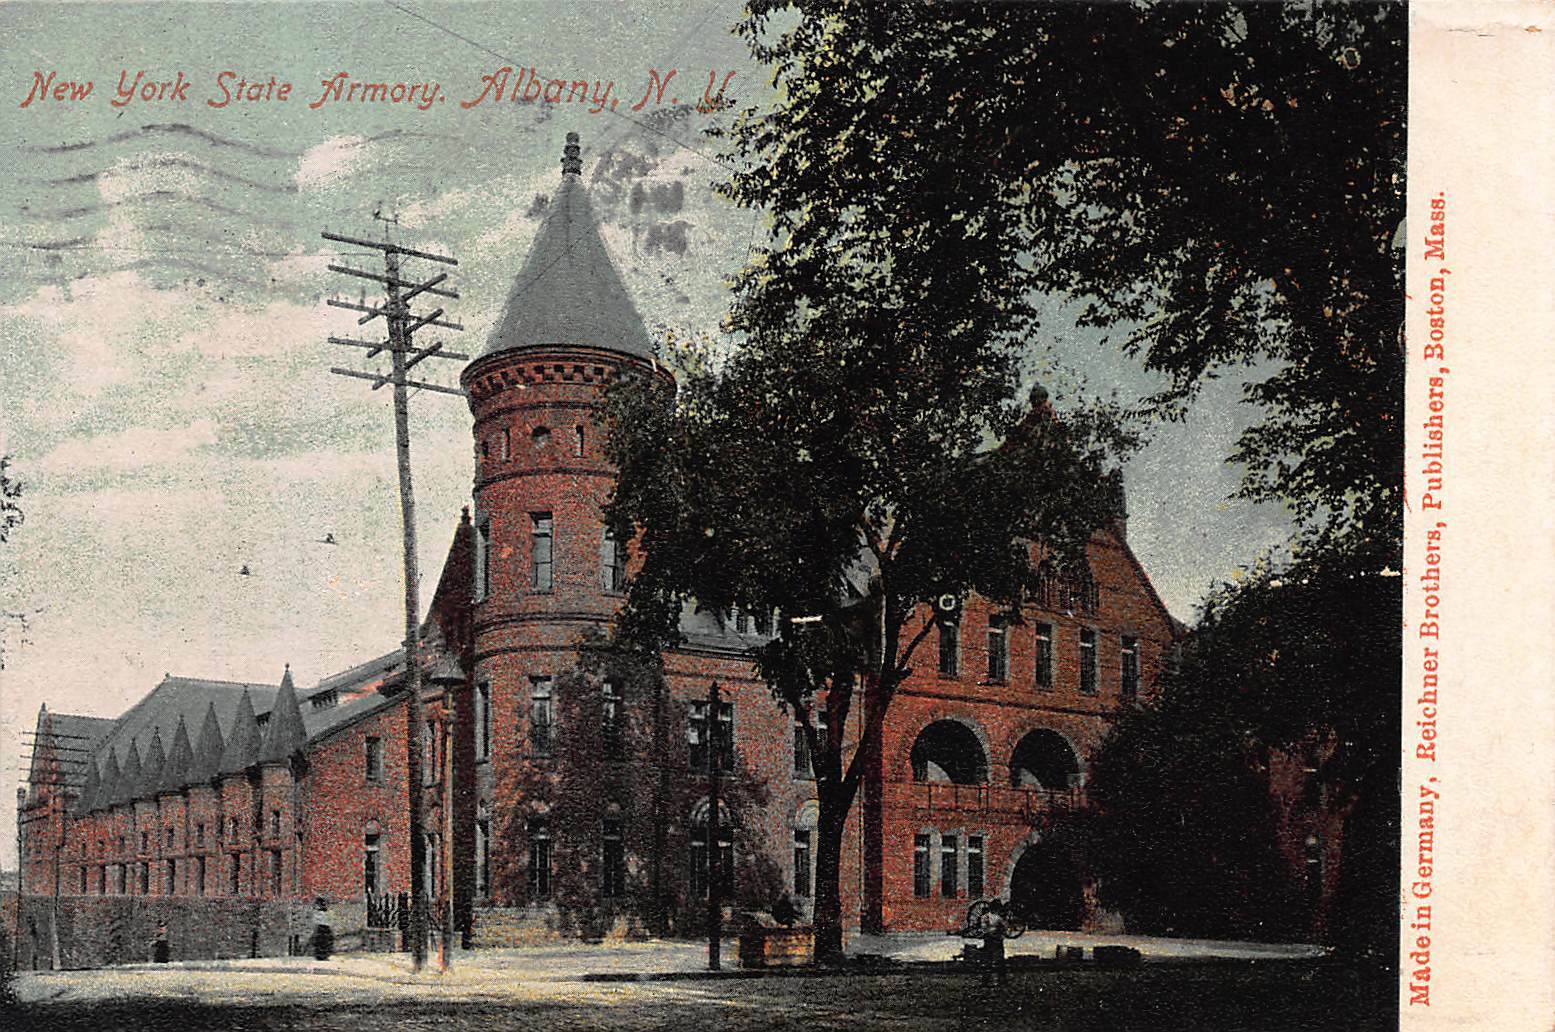 New York State Armory, Albany, N.Y., Early Postcard Used in 1907